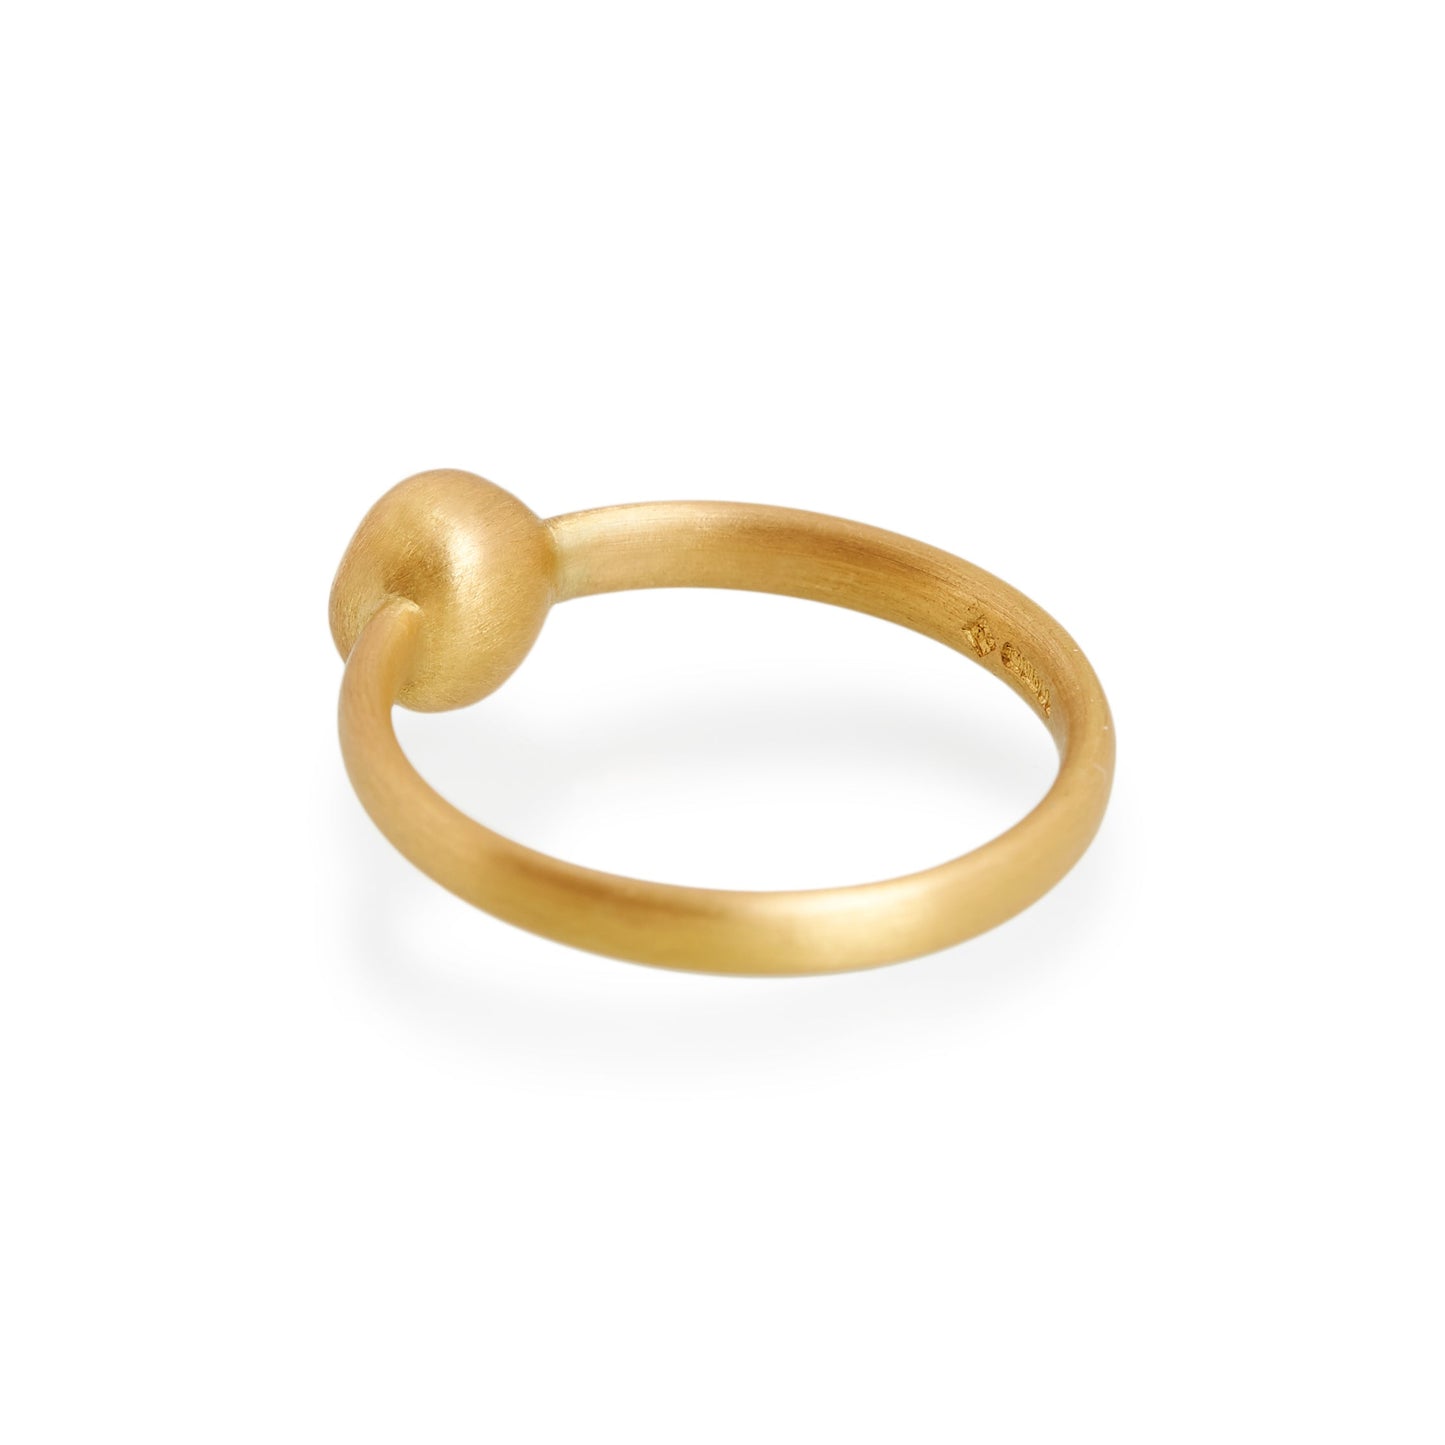 Black Pearl Ring, 22ct Gold